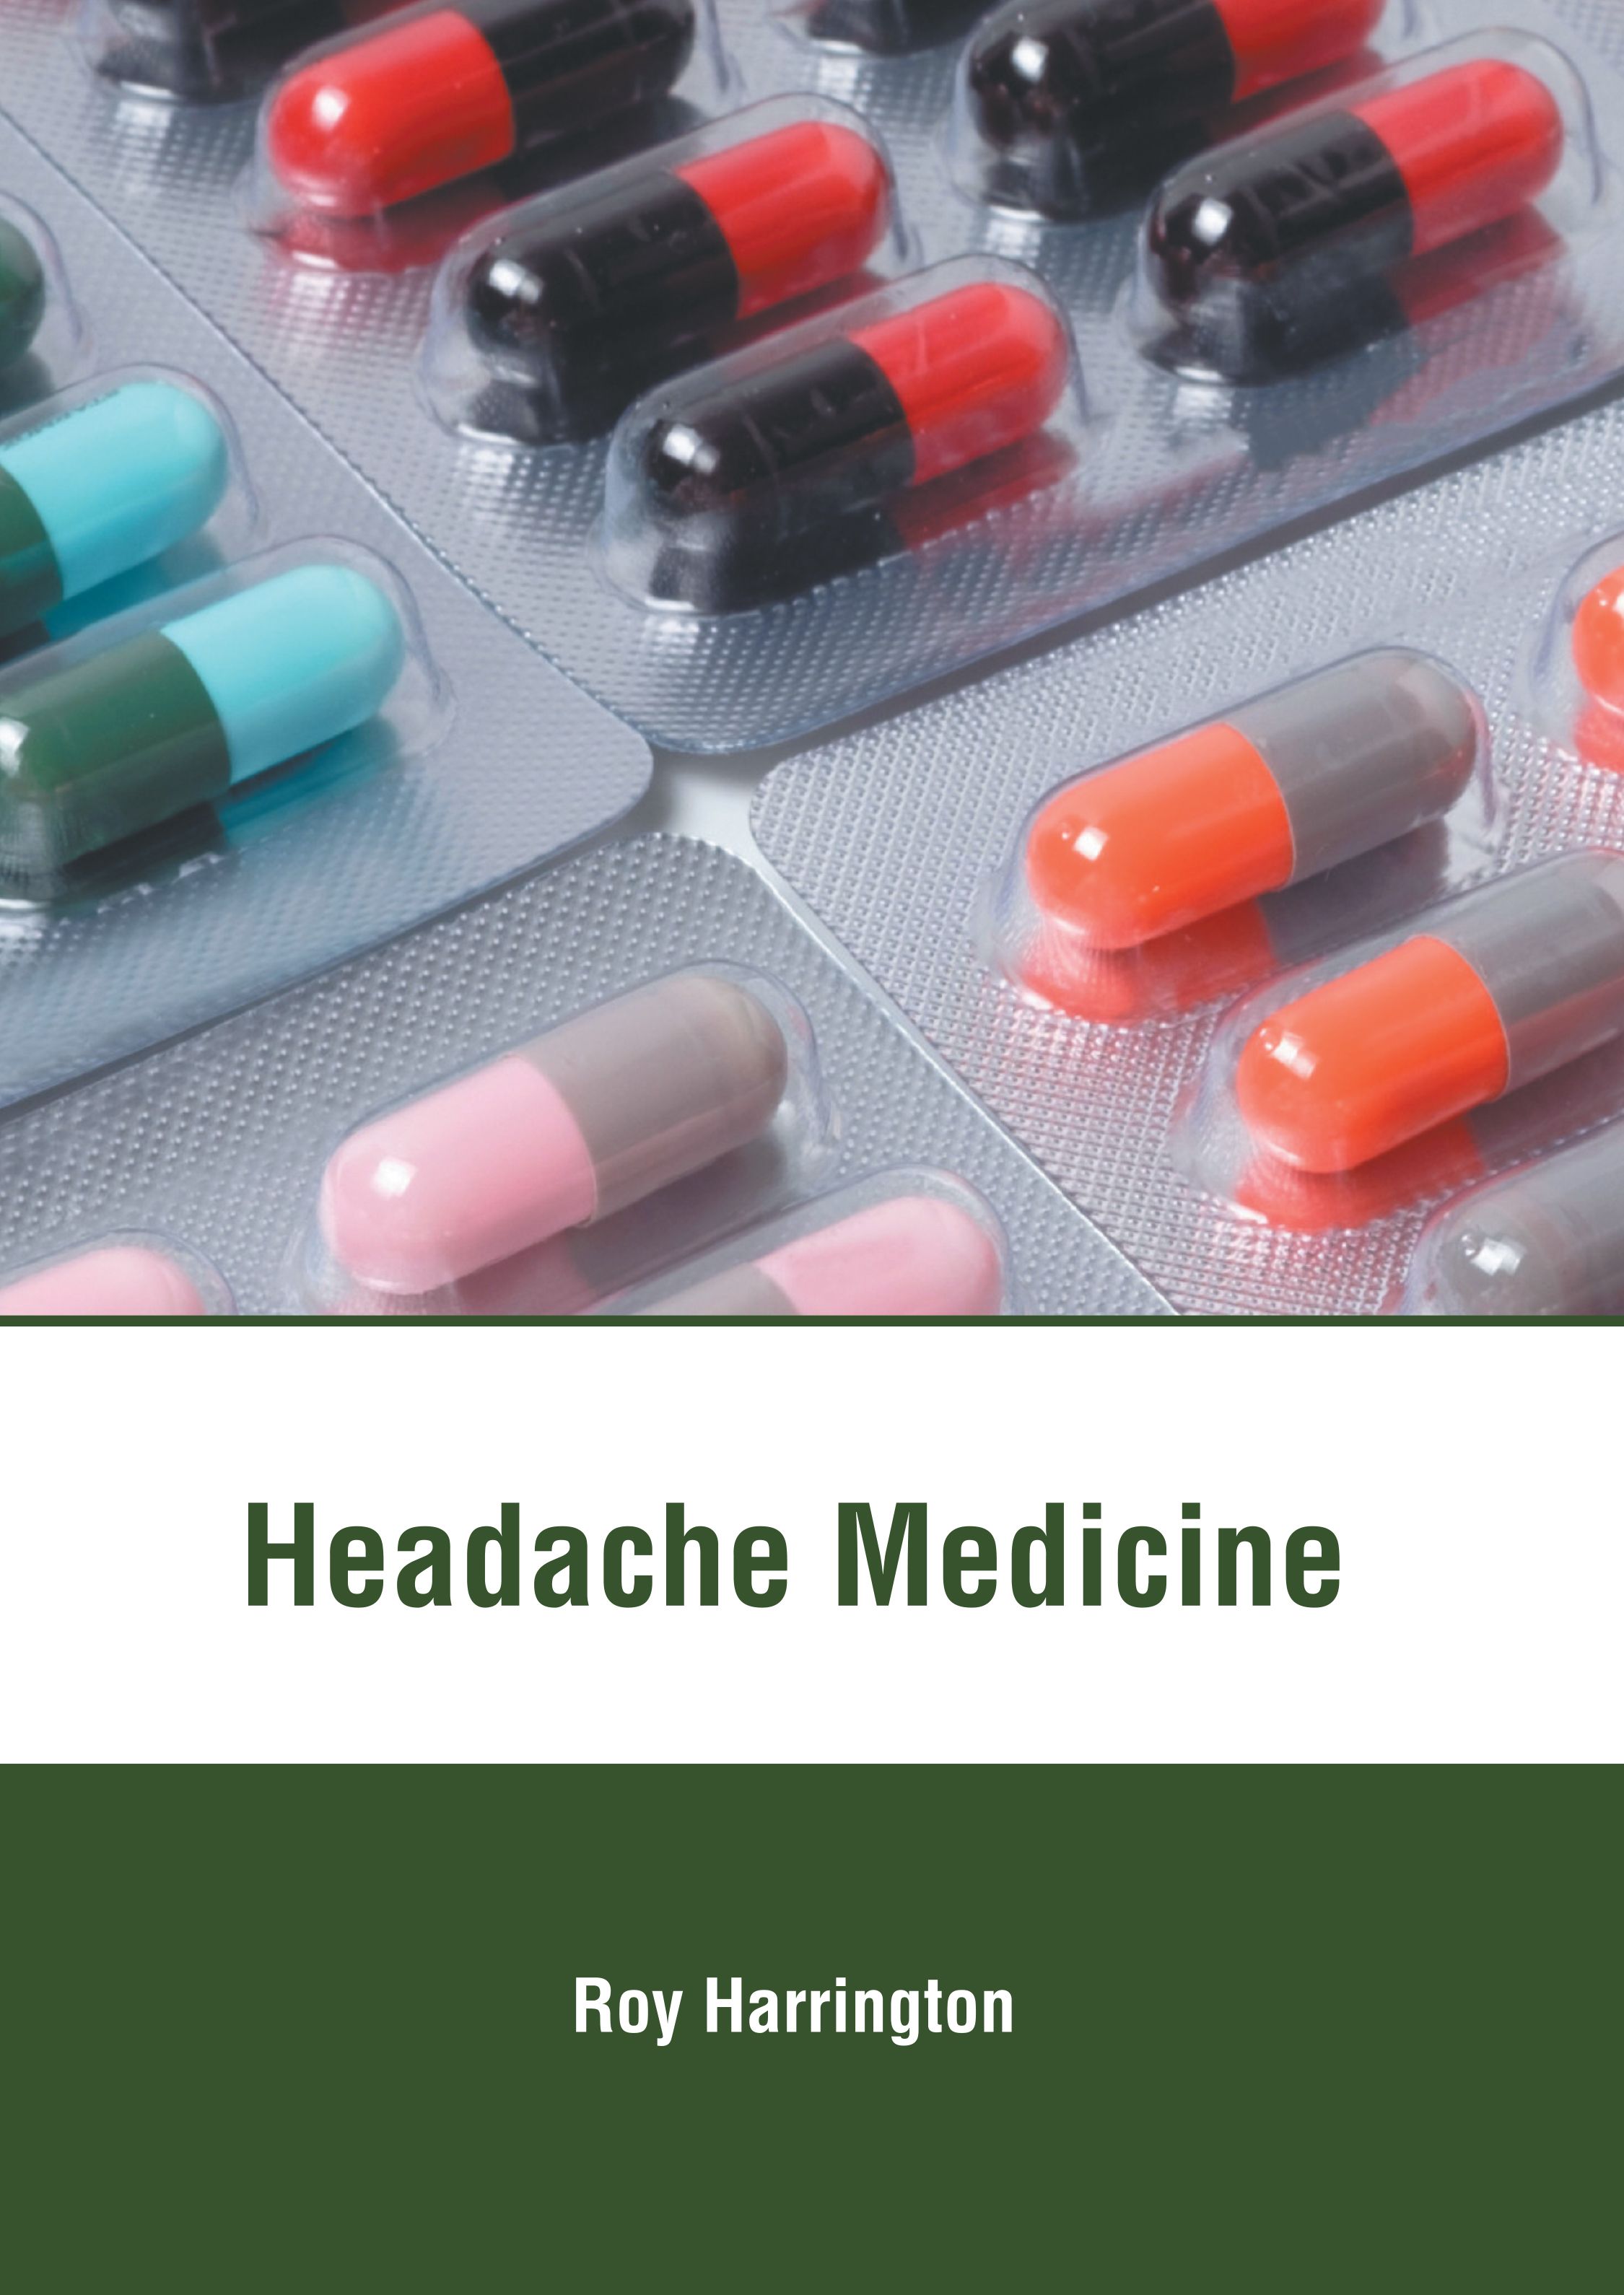 

exclusive-publishers/american-medical-publishers/headache-medicine-9781639272990